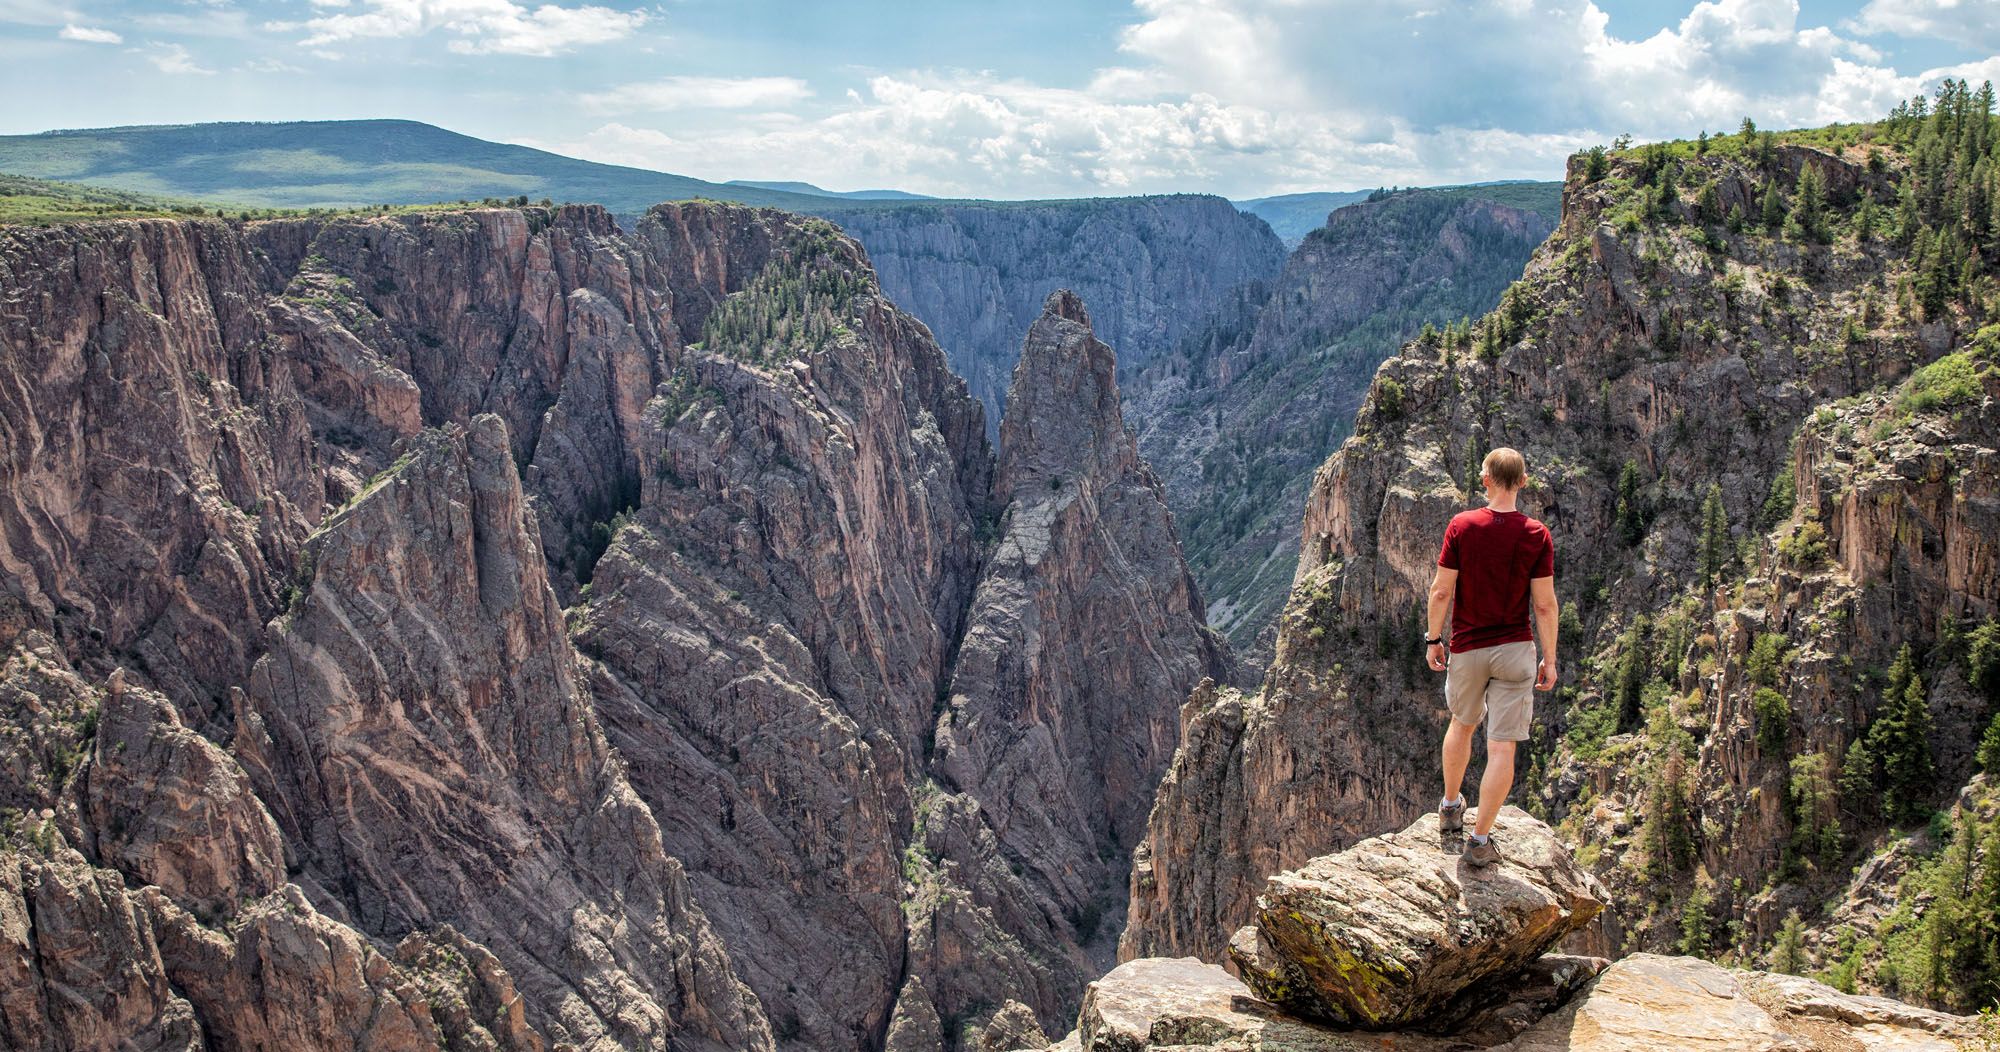 Featured image for “Complete Guide to South Rim Drive Road, Black Canyon of the Gunnison”